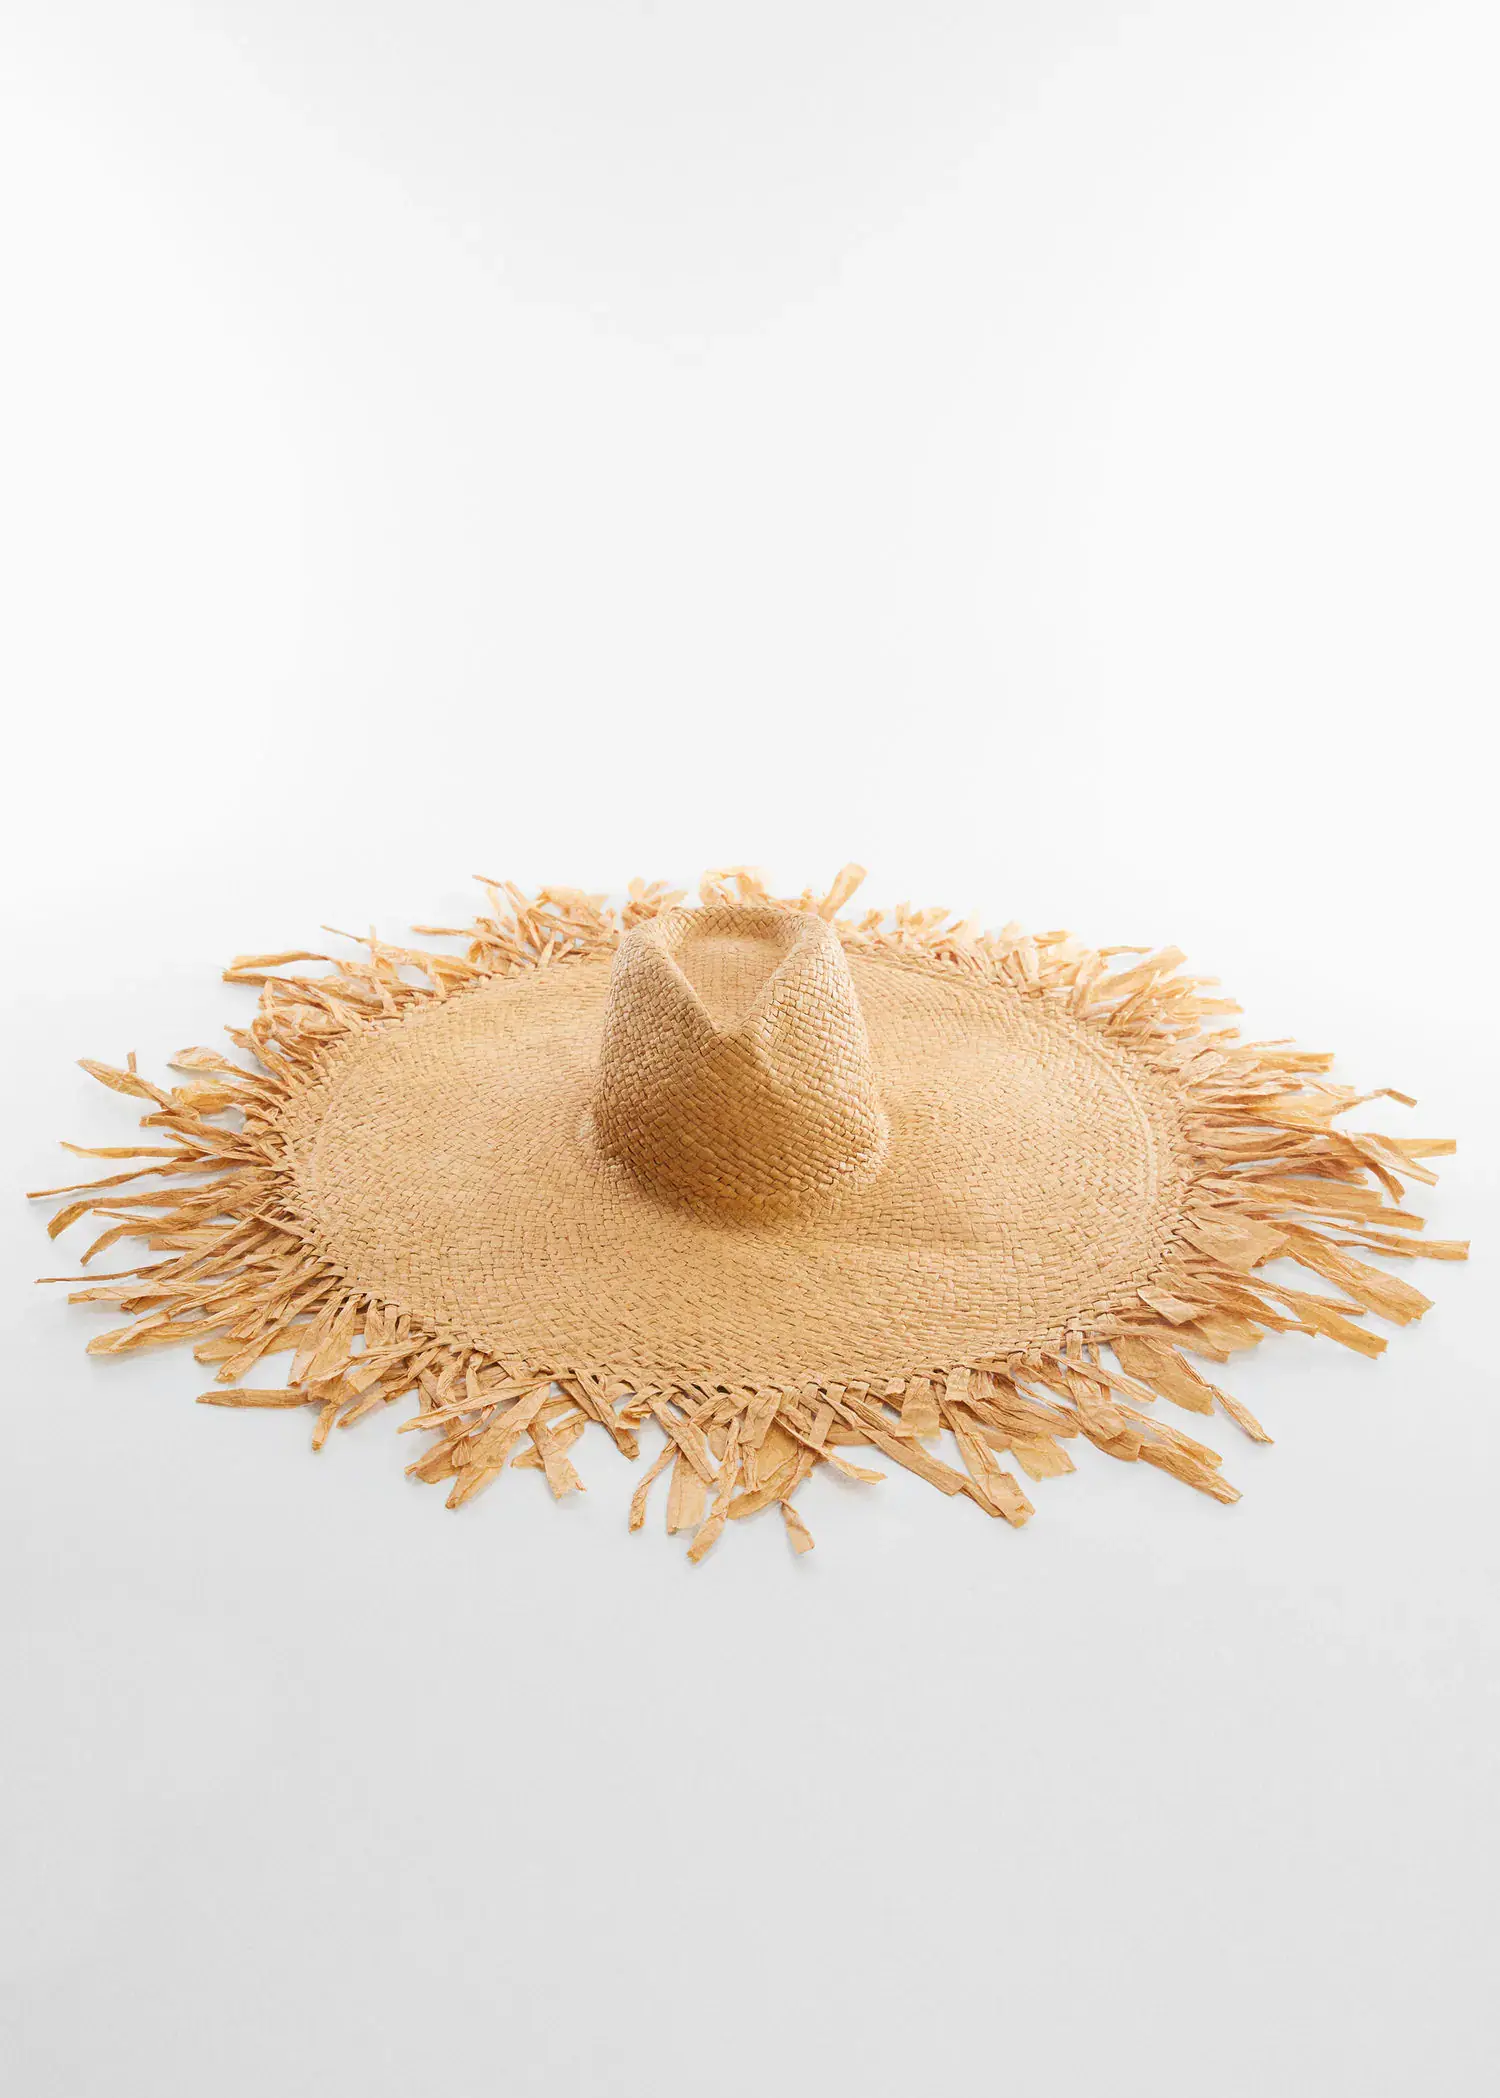 Mango Natural fibre maxi hat. a straw hat sitting on top of a white table. 